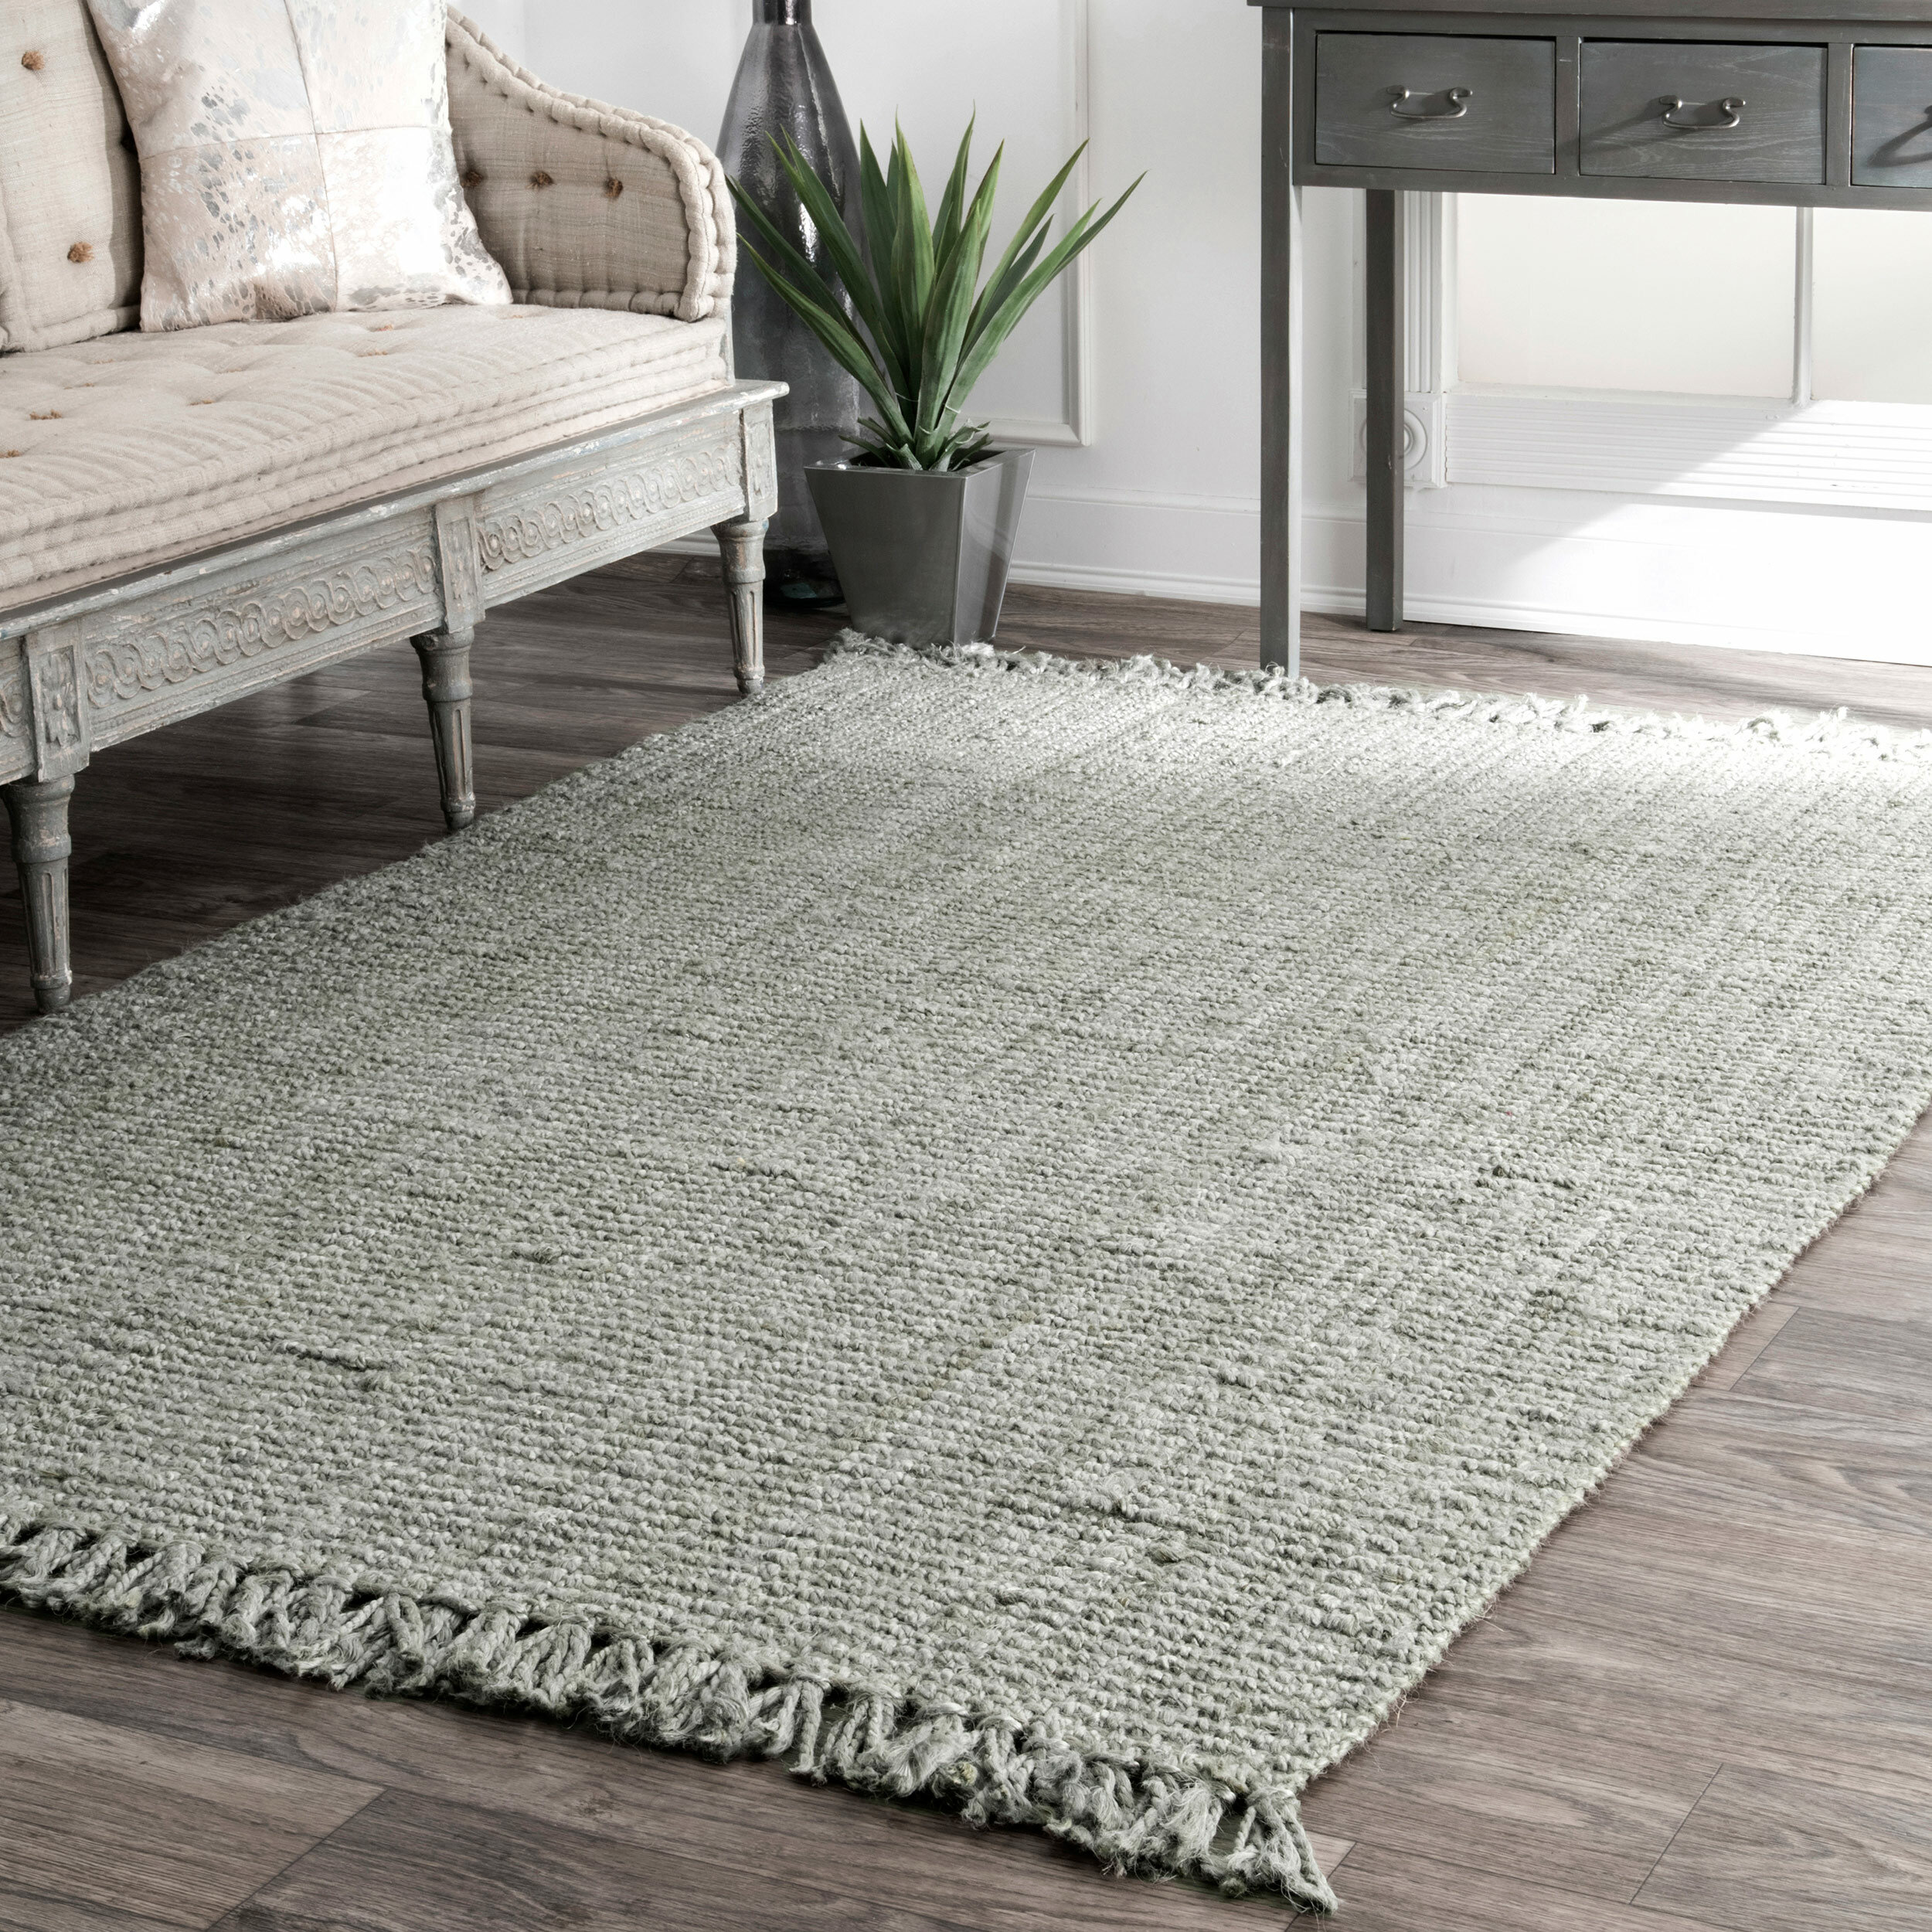 Featured image of post Grey Couch Jute Rug / Choose from temple &amp; webster&#039;s extensive range of rugs online, from shaggy hides, mats, round rugs, contemporary jute rugs to brighten up your space.